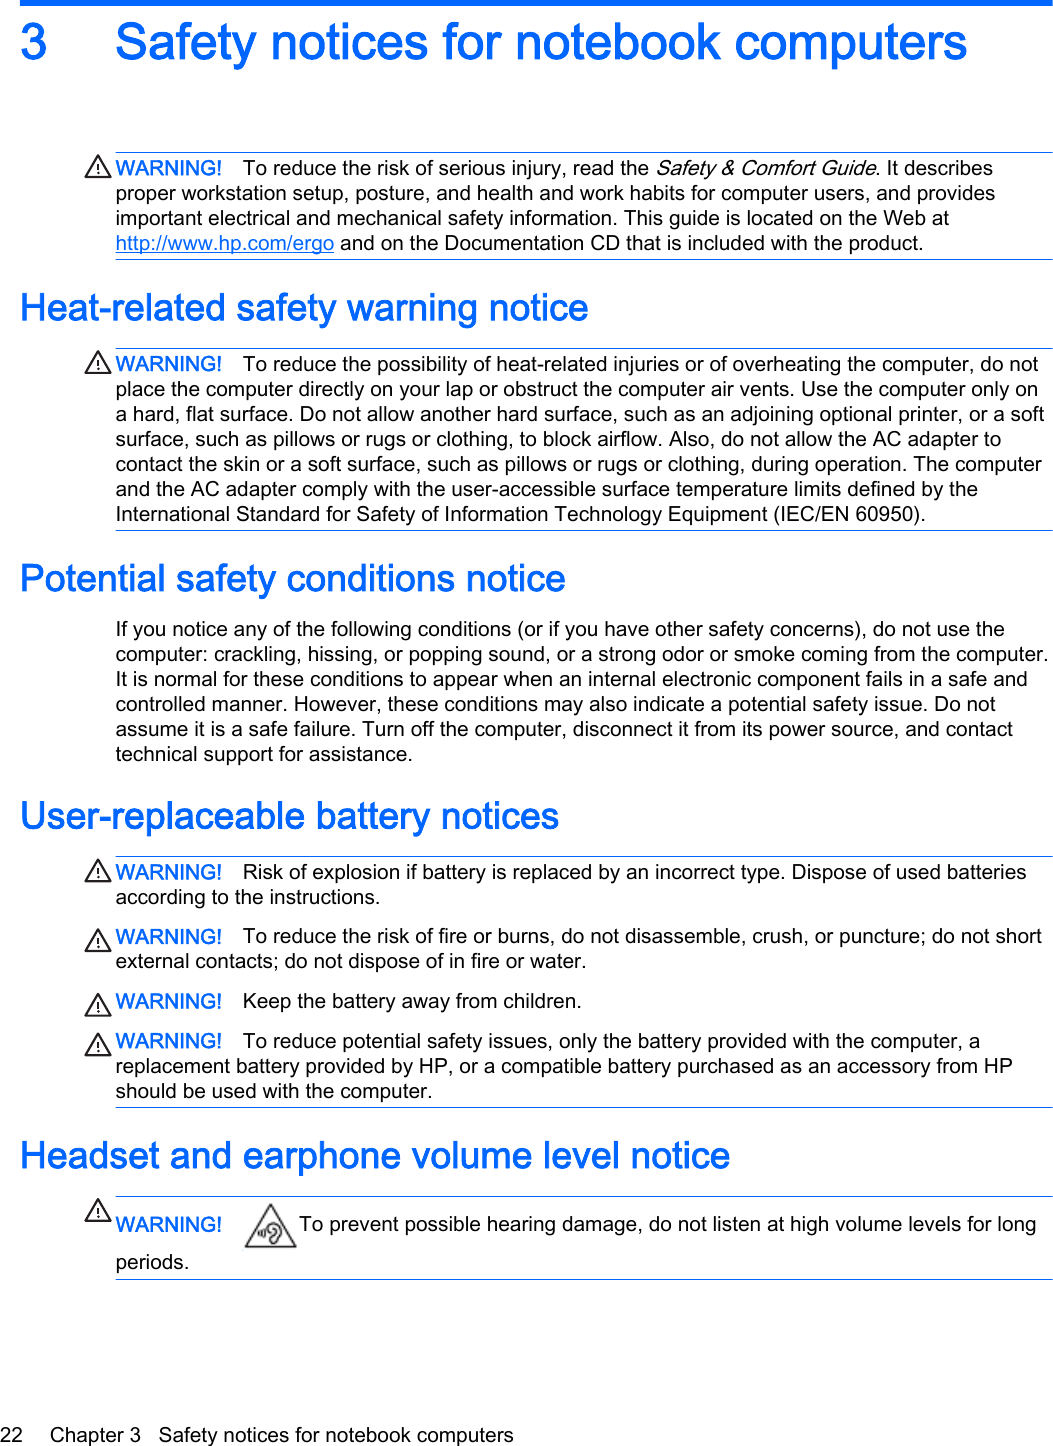 3 Safety notices for notebook computersWARNING! To reduce the risk of serious injury, read the Safety &amp; Comfort Guide. It describes proper workstation setup, posture, and health and work habits for computer users, and provides important electrical and mechanical safety information. This guide is located on the Web at http://www.hp.com/ergo and on the Documentation CD that is included with the product.Heat-related safety warning noticeWARNING! To reduce the possibility of heat-related injuries or of overheating the computer, do not place the computer directly on your lap or obstruct the computer air vents. Use the computer only on a hard, flat surface. Do not allow another hard surface, such as an adjoining optional printer, or a soft surface, such as pillows or rugs or clothing, to block airflow. Also, do not allow the AC adapter to contact the skin or a soft surface, such as pillows or rugs or clothing, during operation. The computer and the AC adapter comply with the user-accessible surface temperature limits defined by the International Standard for Safety of Information Technology Equipment (IEC/EN 60950).Potential safety conditions noticeIf you notice any of the following conditions (or if you have other safety concerns), do not use the computer: crackling, hissing, or popping sound, or a strong odor or smoke coming from the computer. It is normal for these conditions to appear when an internal electronic component fails in a safe and controlled manner. However, these conditions may also indicate a potential safety issue. Do not assume it is a safe failure. Turn off the computer, disconnect it from its power source, and contact technical support for assistance.User-replaceable battery noticesWARNING! Risk of explosion if battery is replaced by an incorrect type. Dispose of used batteries according to the instructions.WARNING! To reduce the risk of fire or burns, do not disassemble, crush, or puncture; do not short external contacts; do not dispose of in fire or water.WARNING! Keep the battery away from children.WARNING! To reduce potential safety issues, only the battery provided with the computer, a replacement battery provided by HP, or a compatible battery purchased as an accessory from HP should be used with the computer.Headset and earphone volume level noticeWARNING! To prevent possible hearing damage, do not listen at high volume levels for long periods.22 Chapter 3   Safety notices for notebook computers